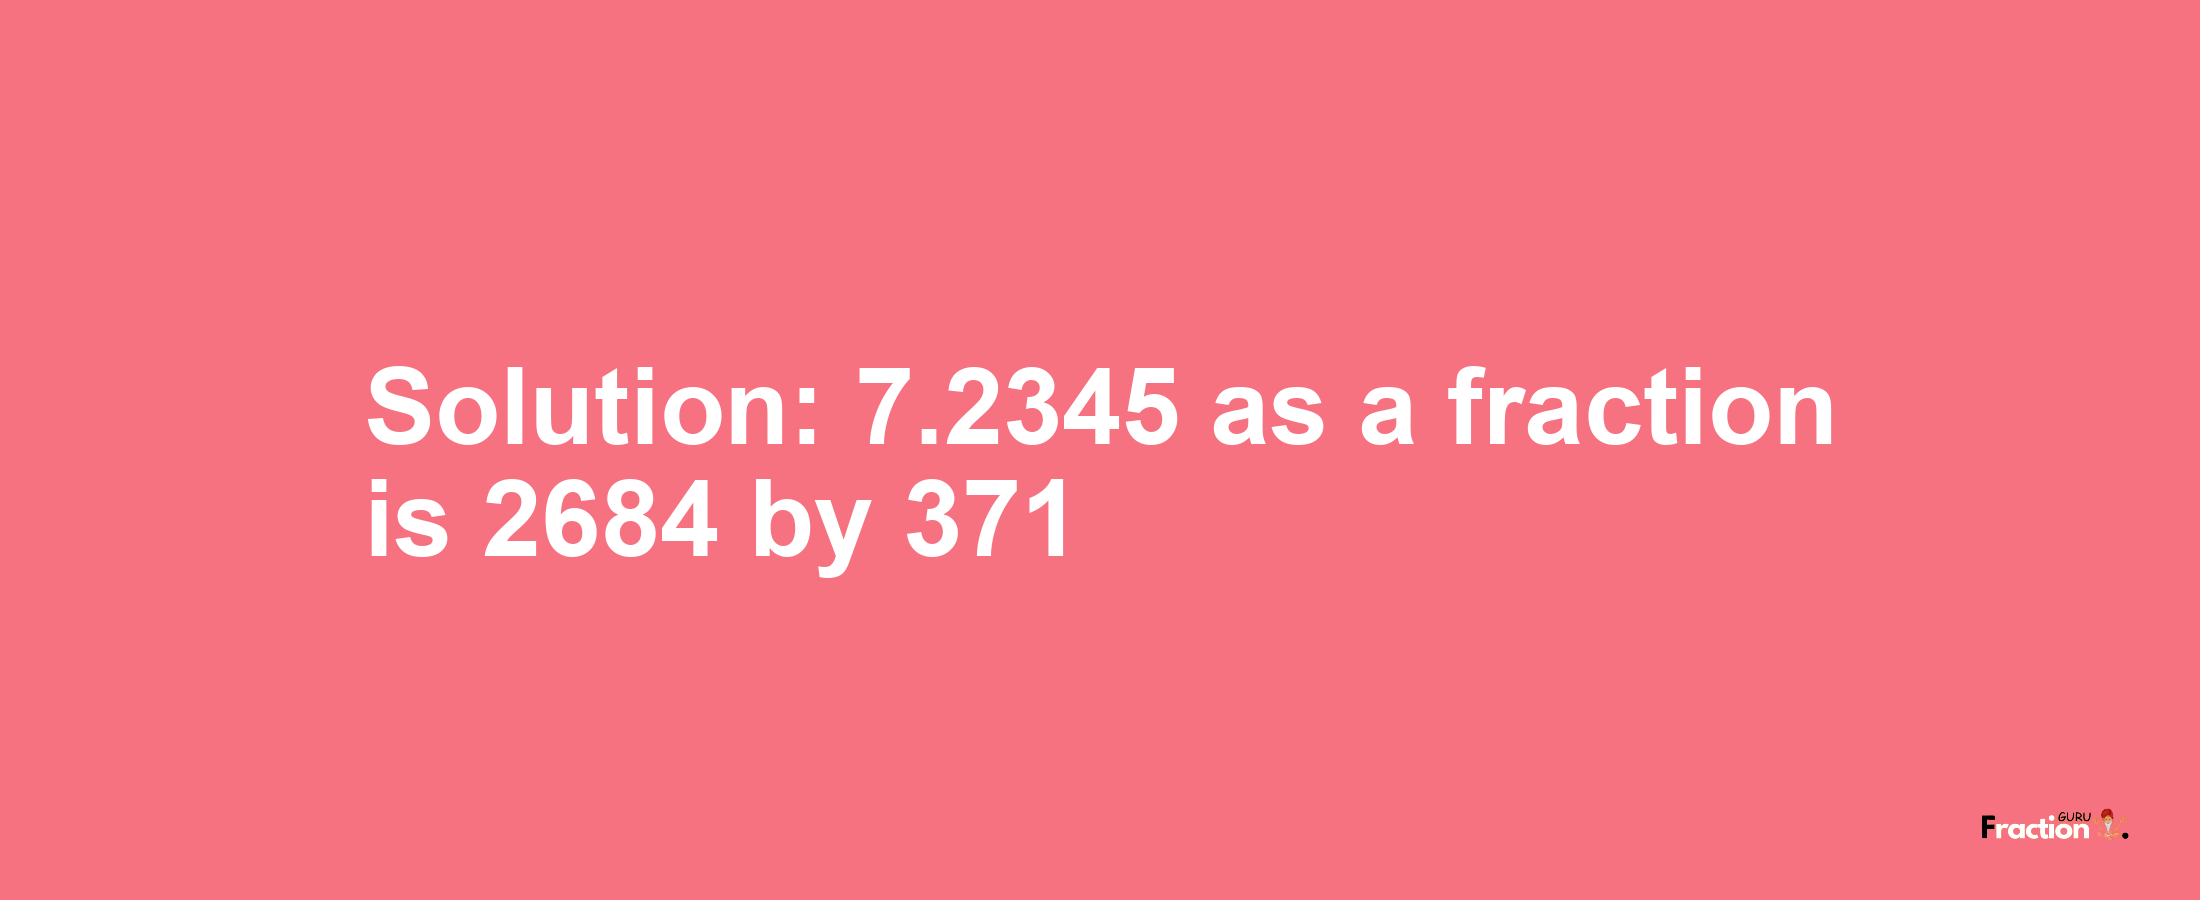 Solution:7.2345 as a fraction is 2684/371